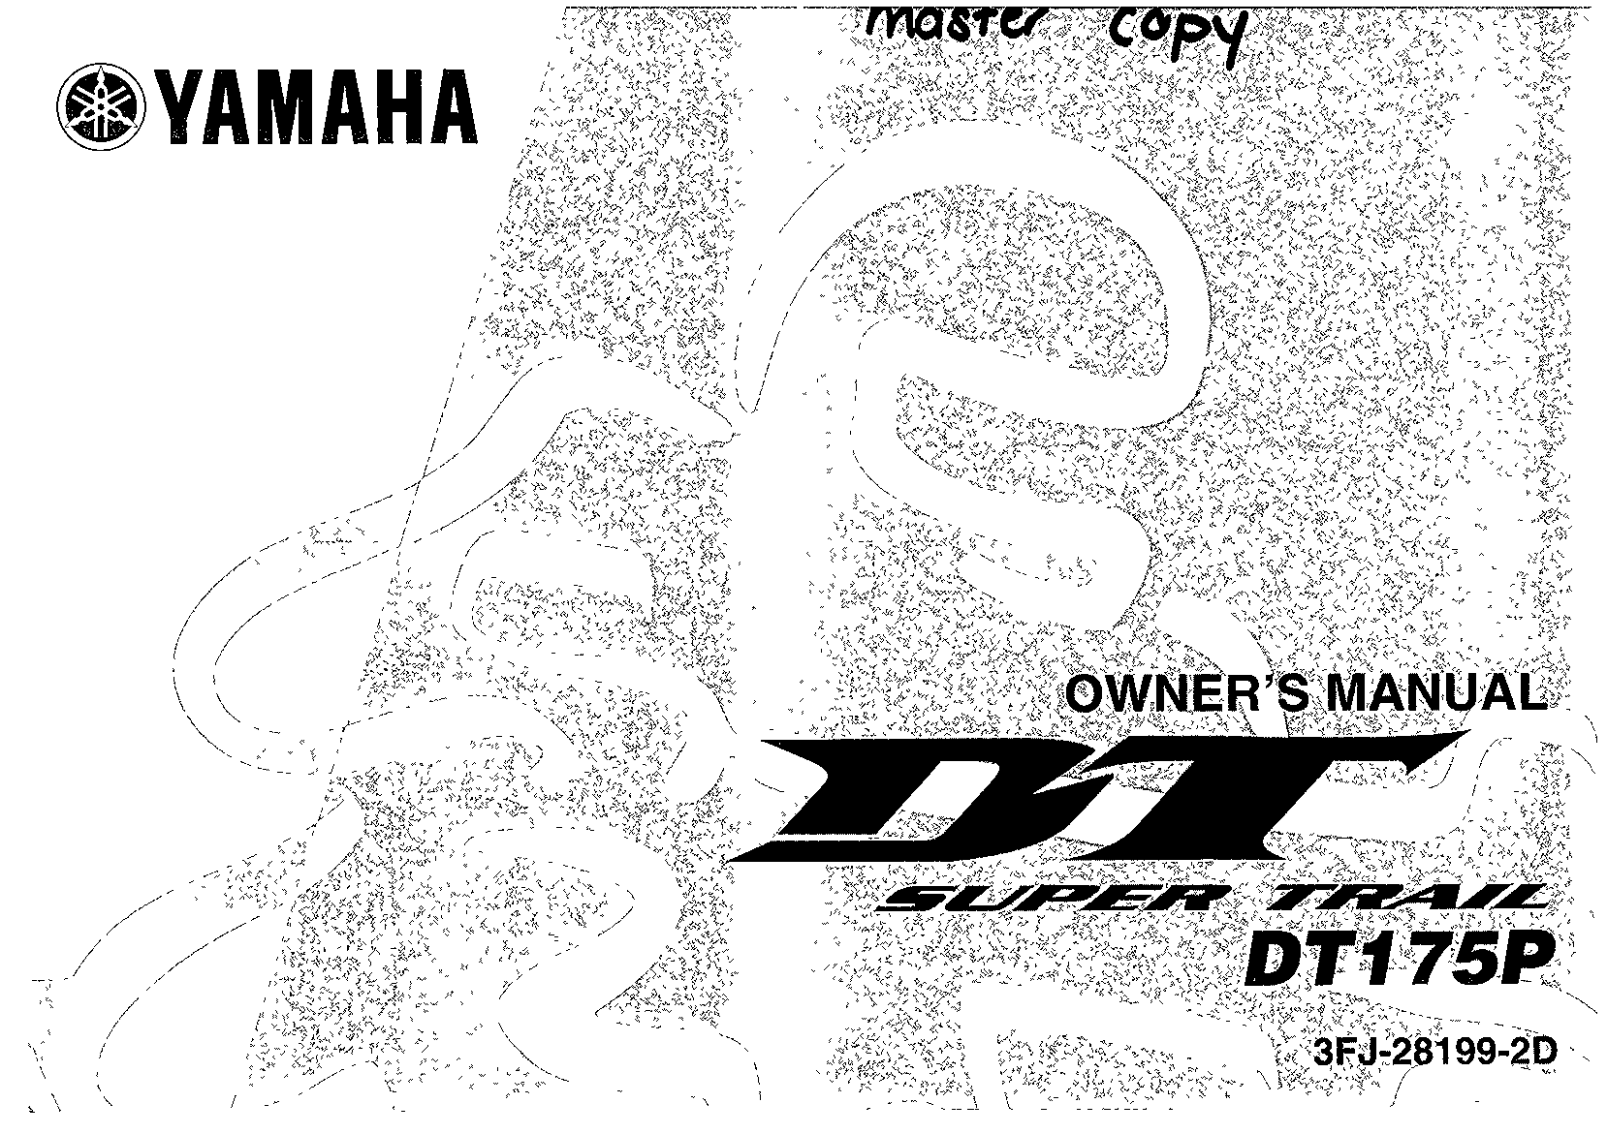 Yamaha DT175 P 2002 Owner's manual